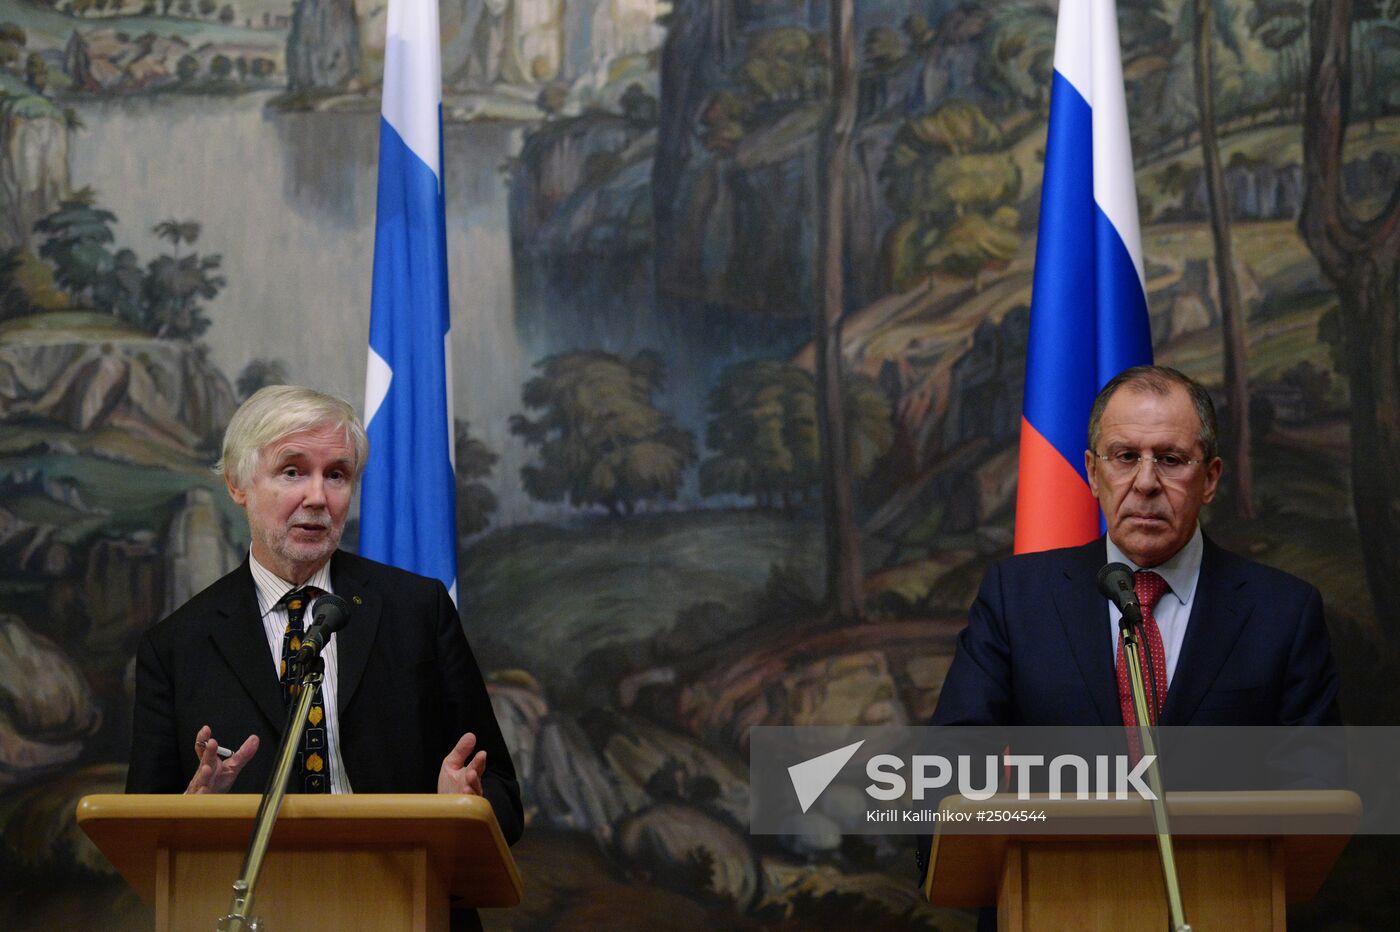 Russian and Finnish Foreign Ministers Sergei Lavrov and Erkki Tuomioja meet